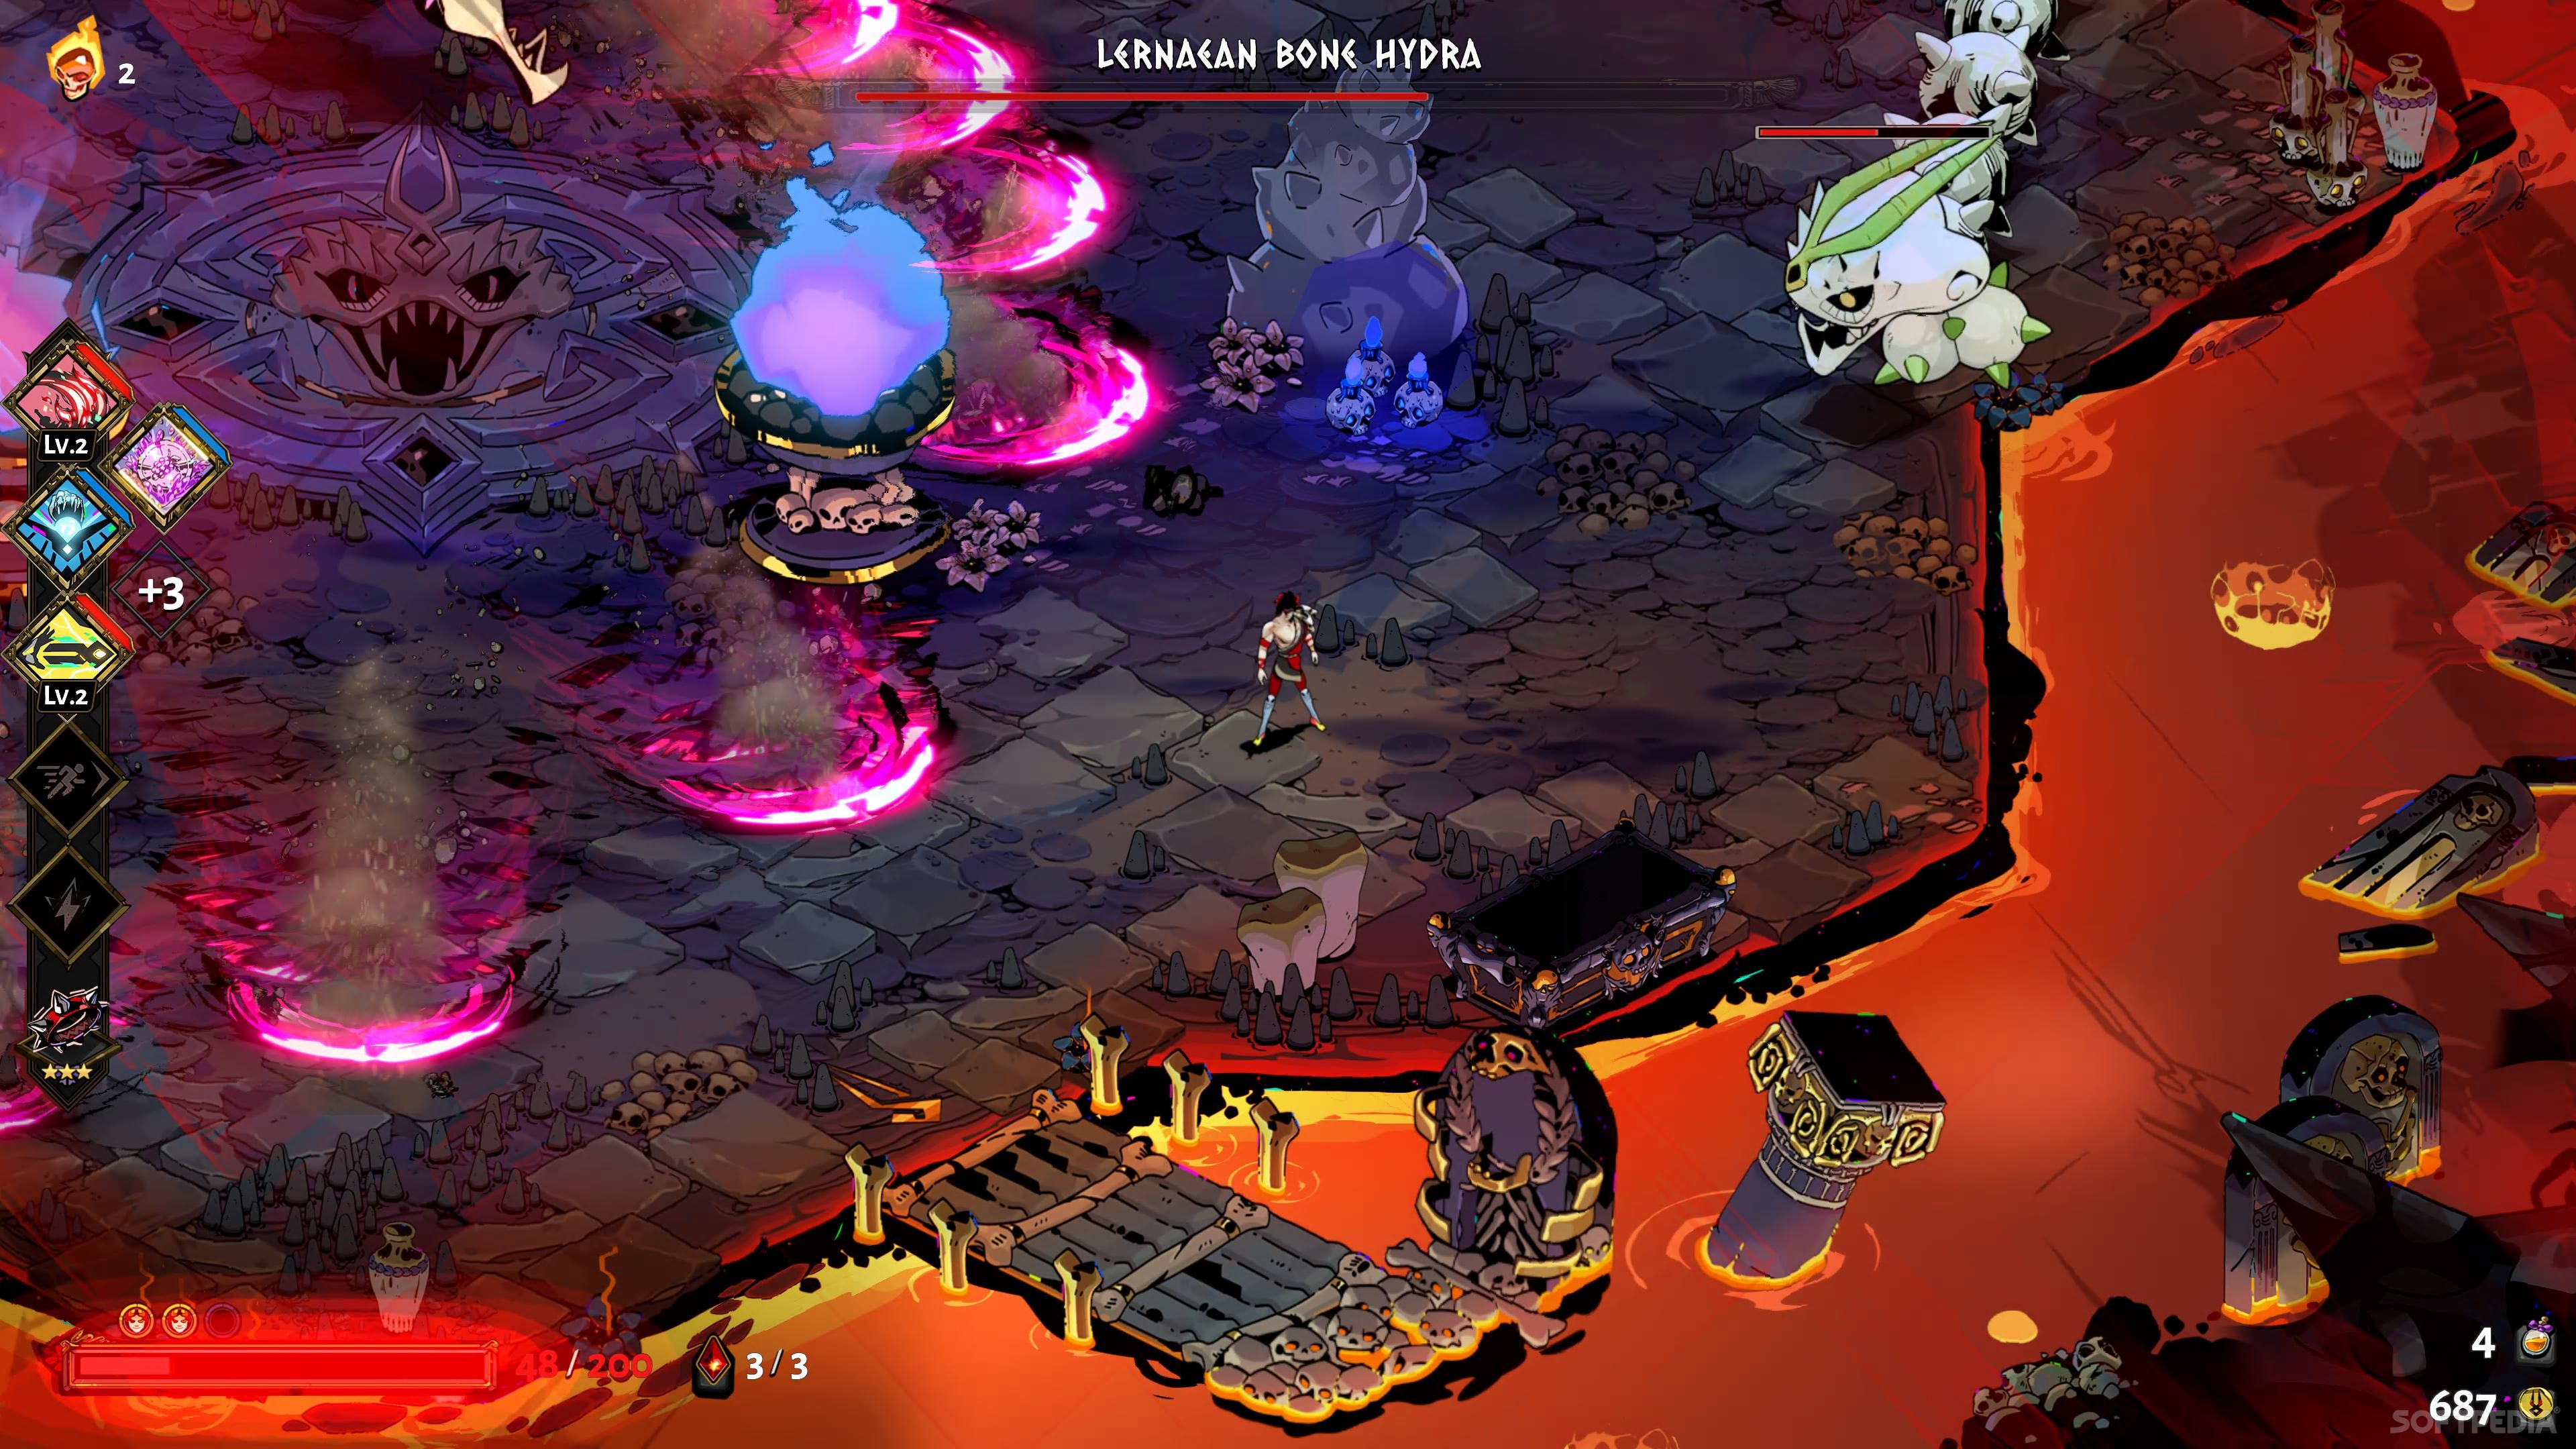 Hades PS5 review: the acclaimed roguelike soars on next-gen hardware